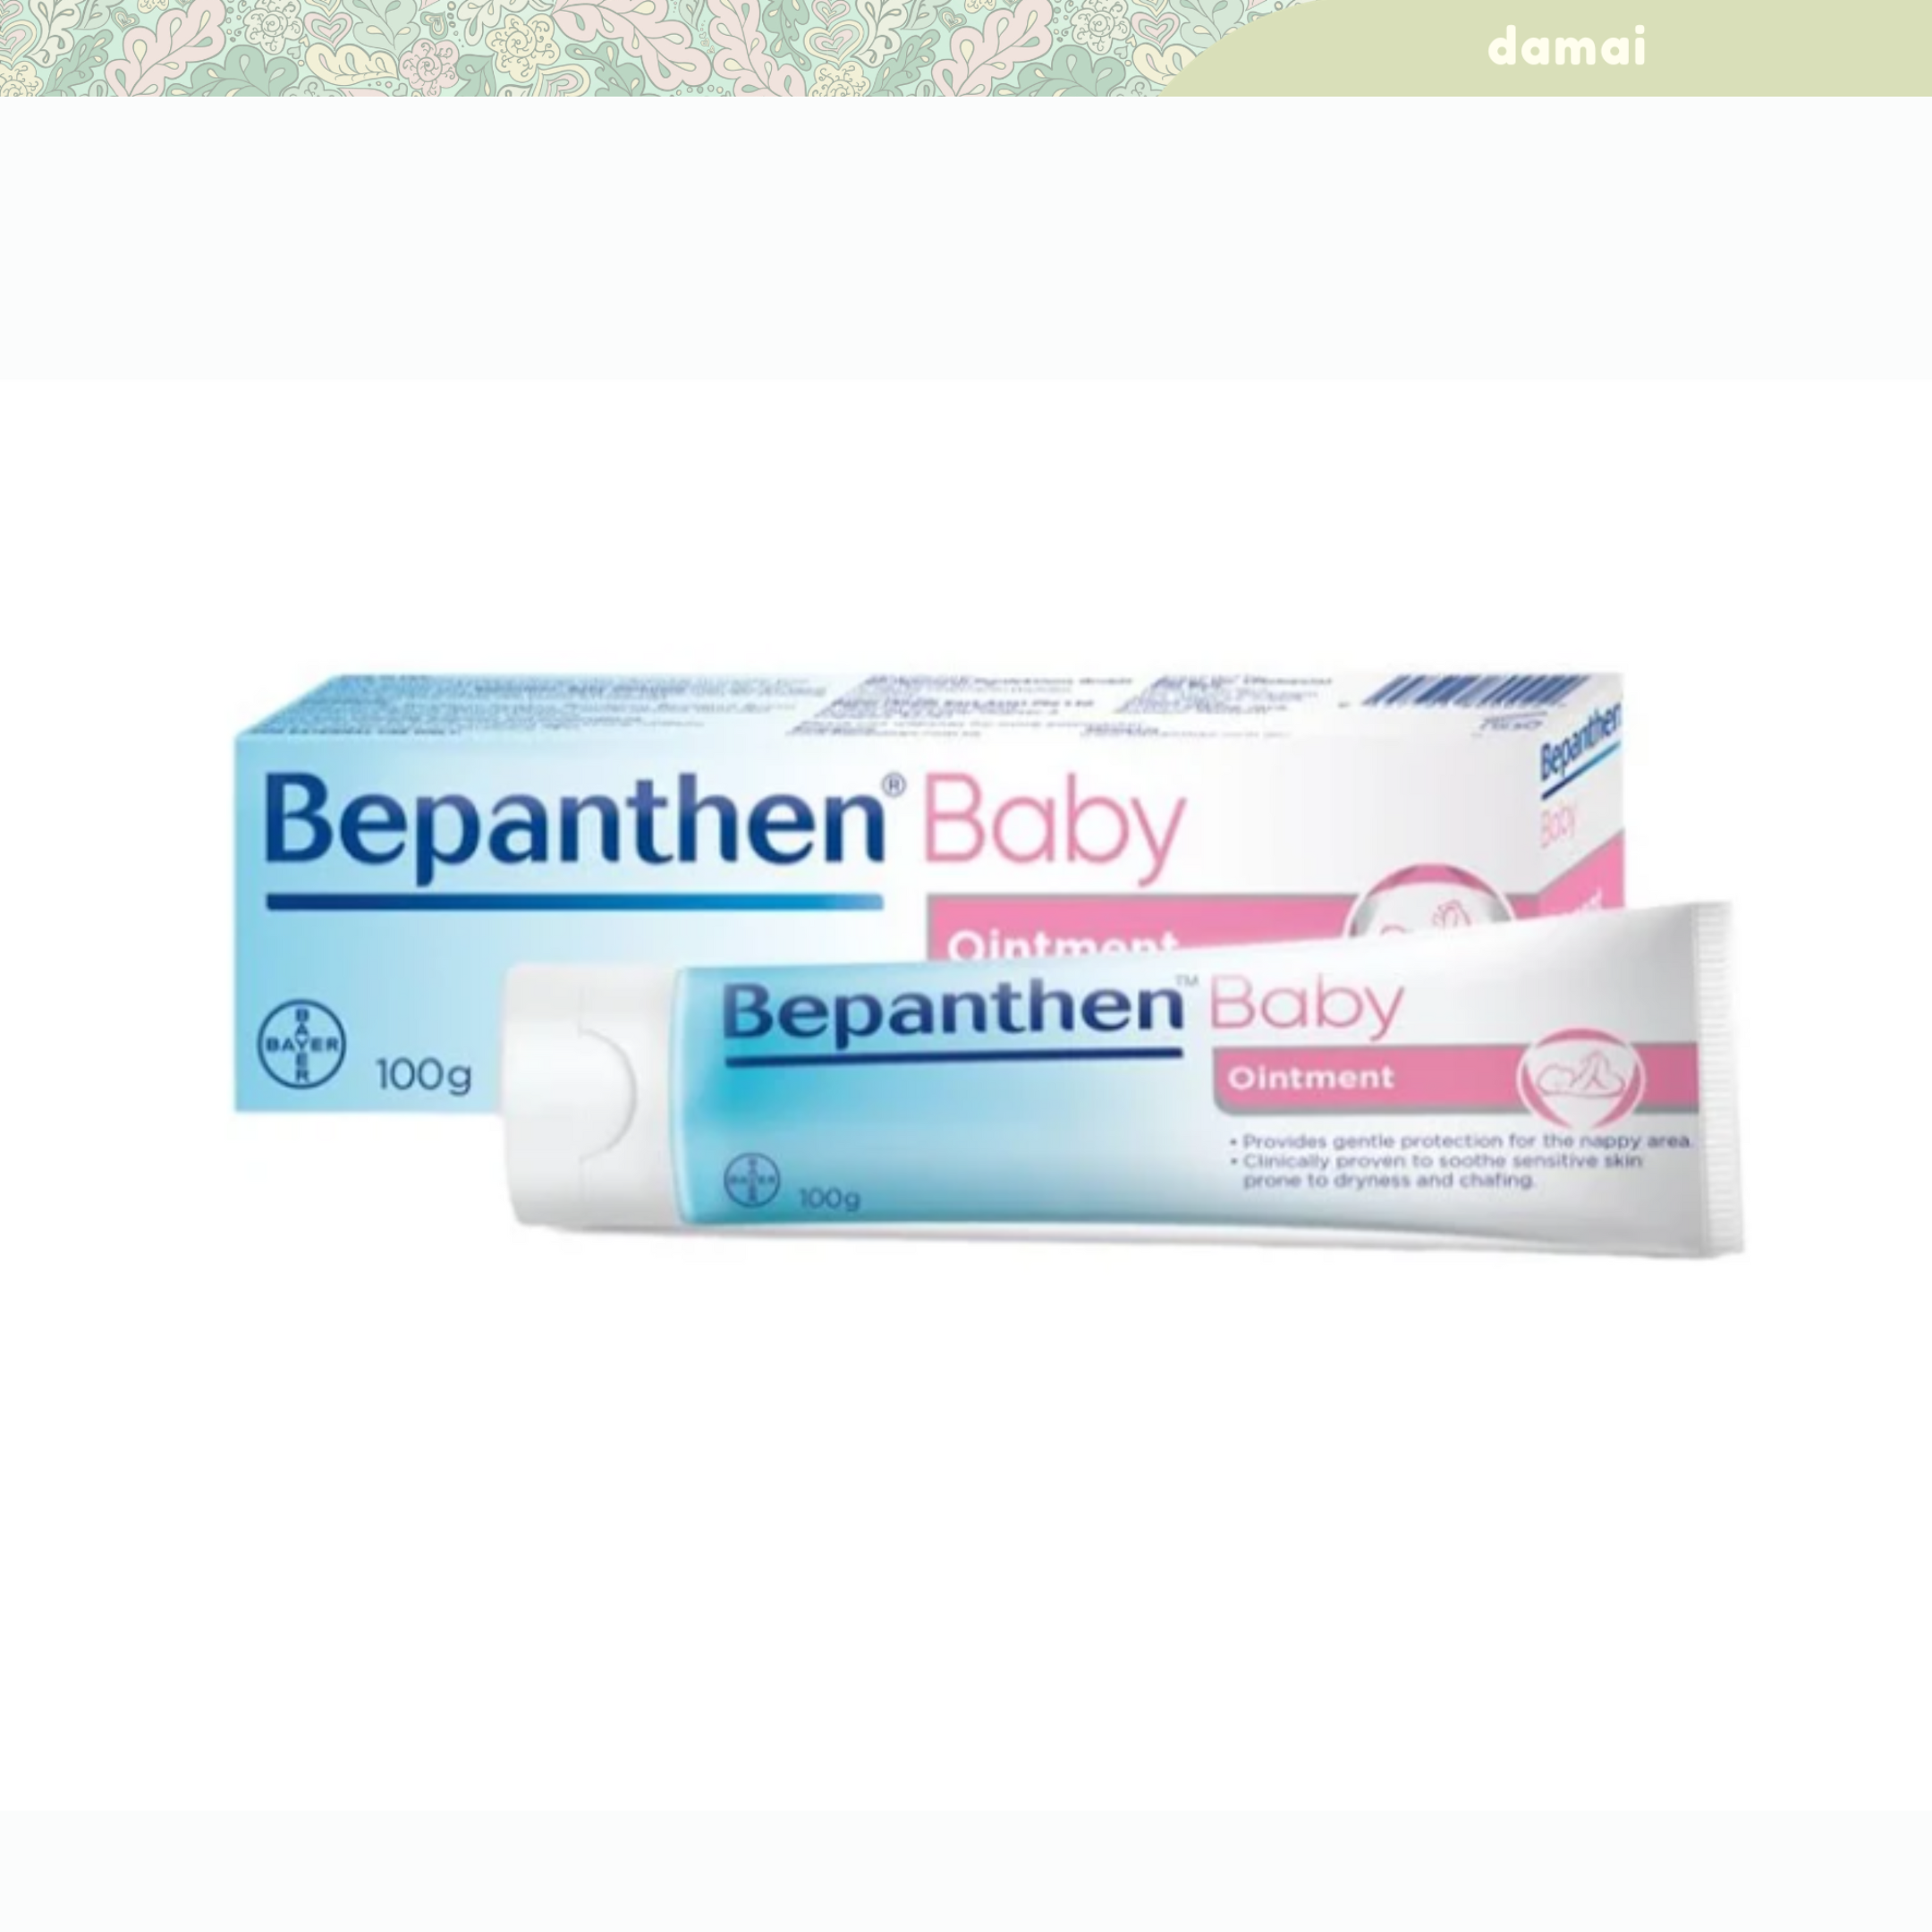 Bepanthen Baby Ointment